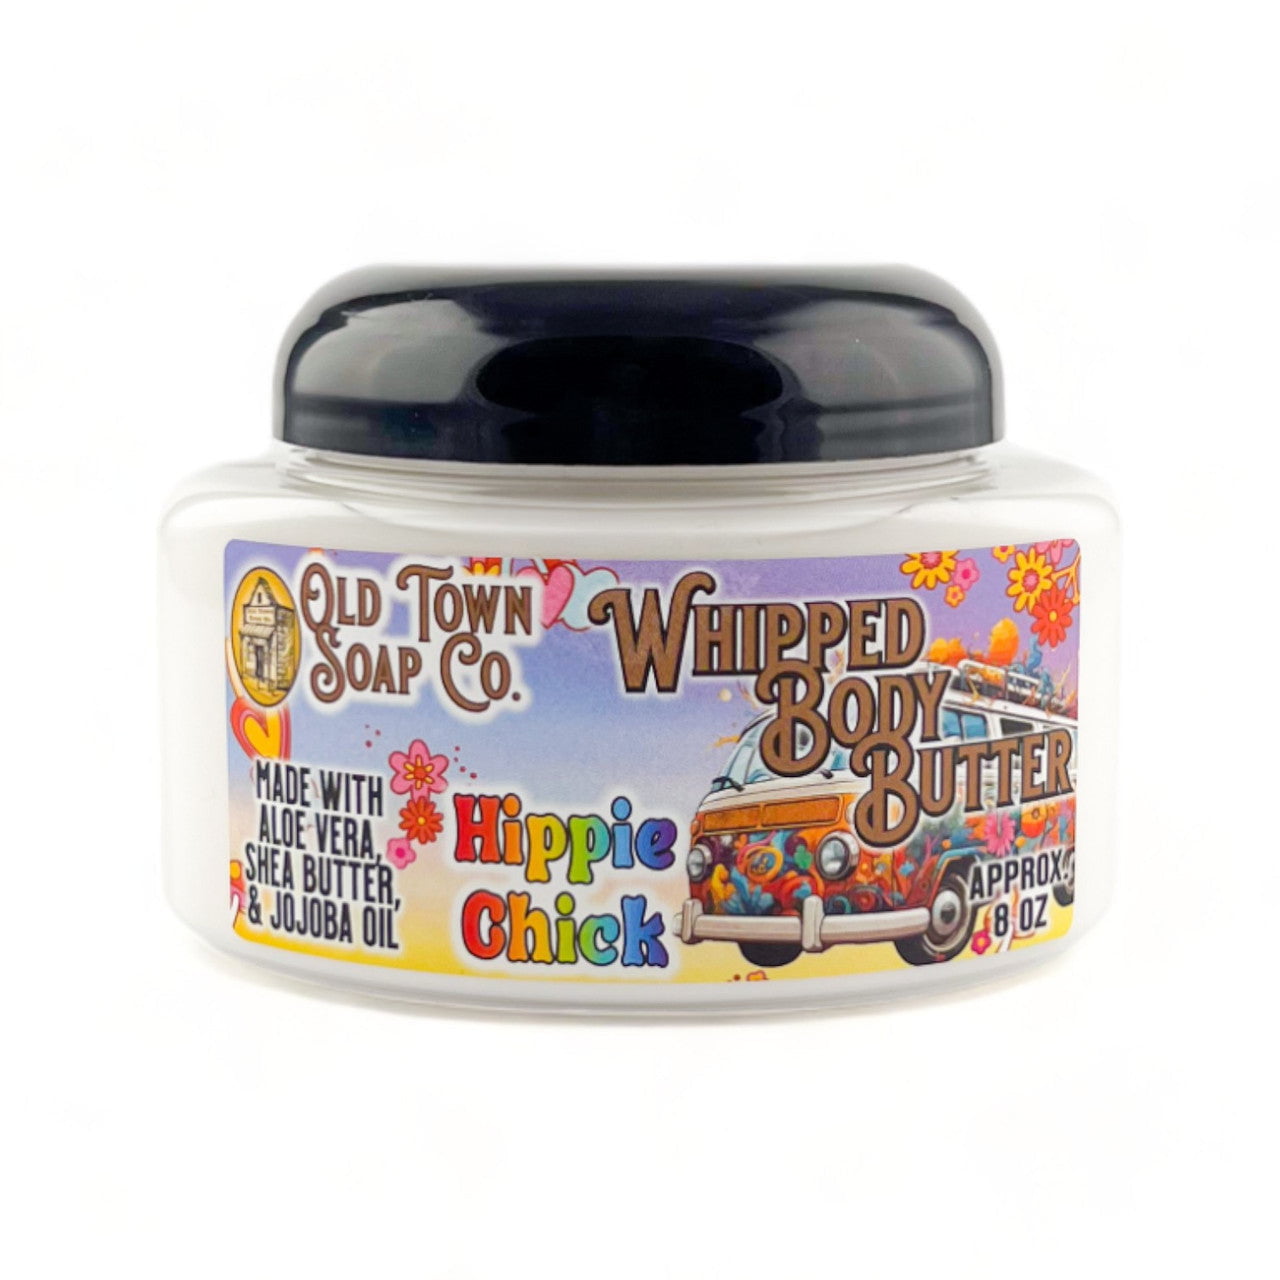 Hippie Chick -Whipped Body Butter - Old Town Soap Co.